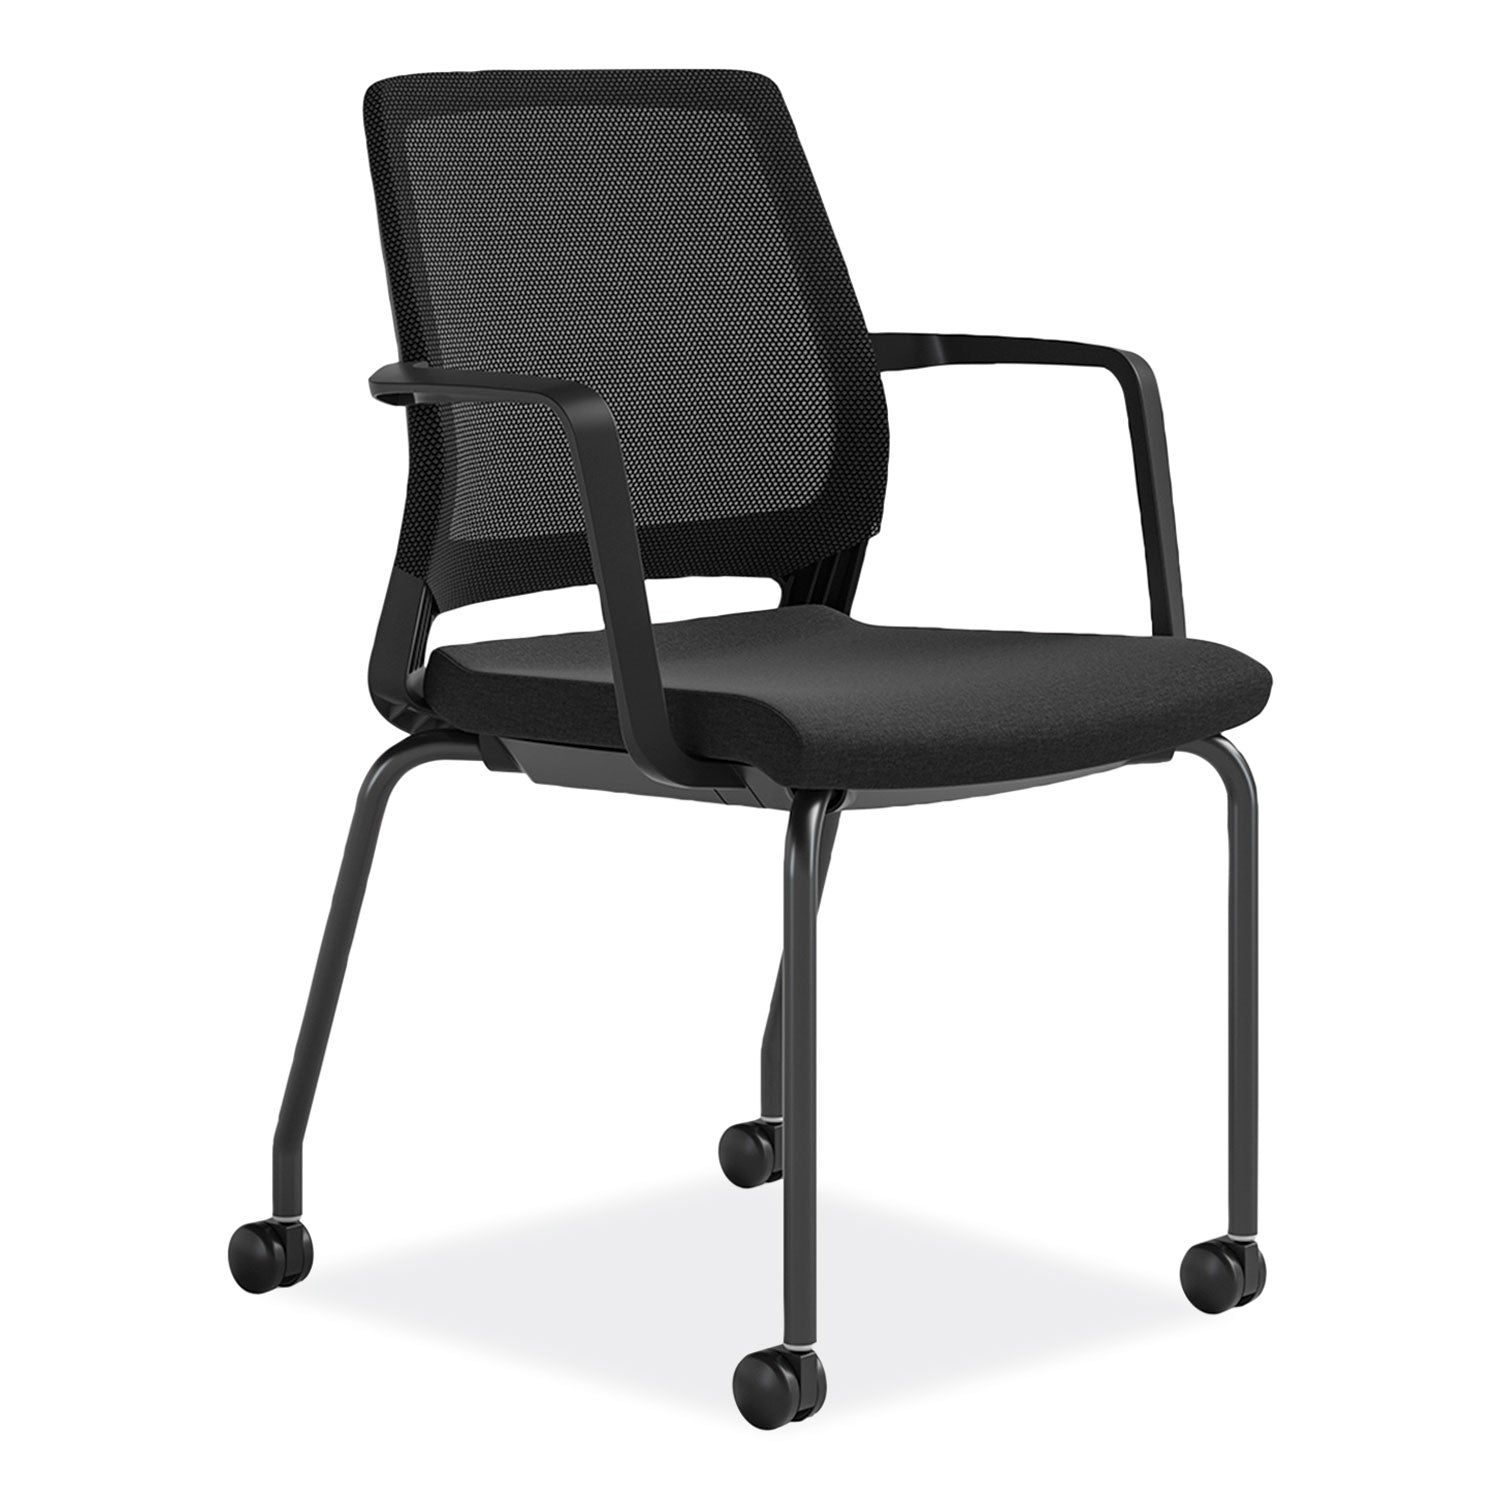 medina-guest-chair-supports-up-to-275-lb-18-seat-height-black-seat-back-base-ships-in-1-3-business-days_saf6829bl - 1